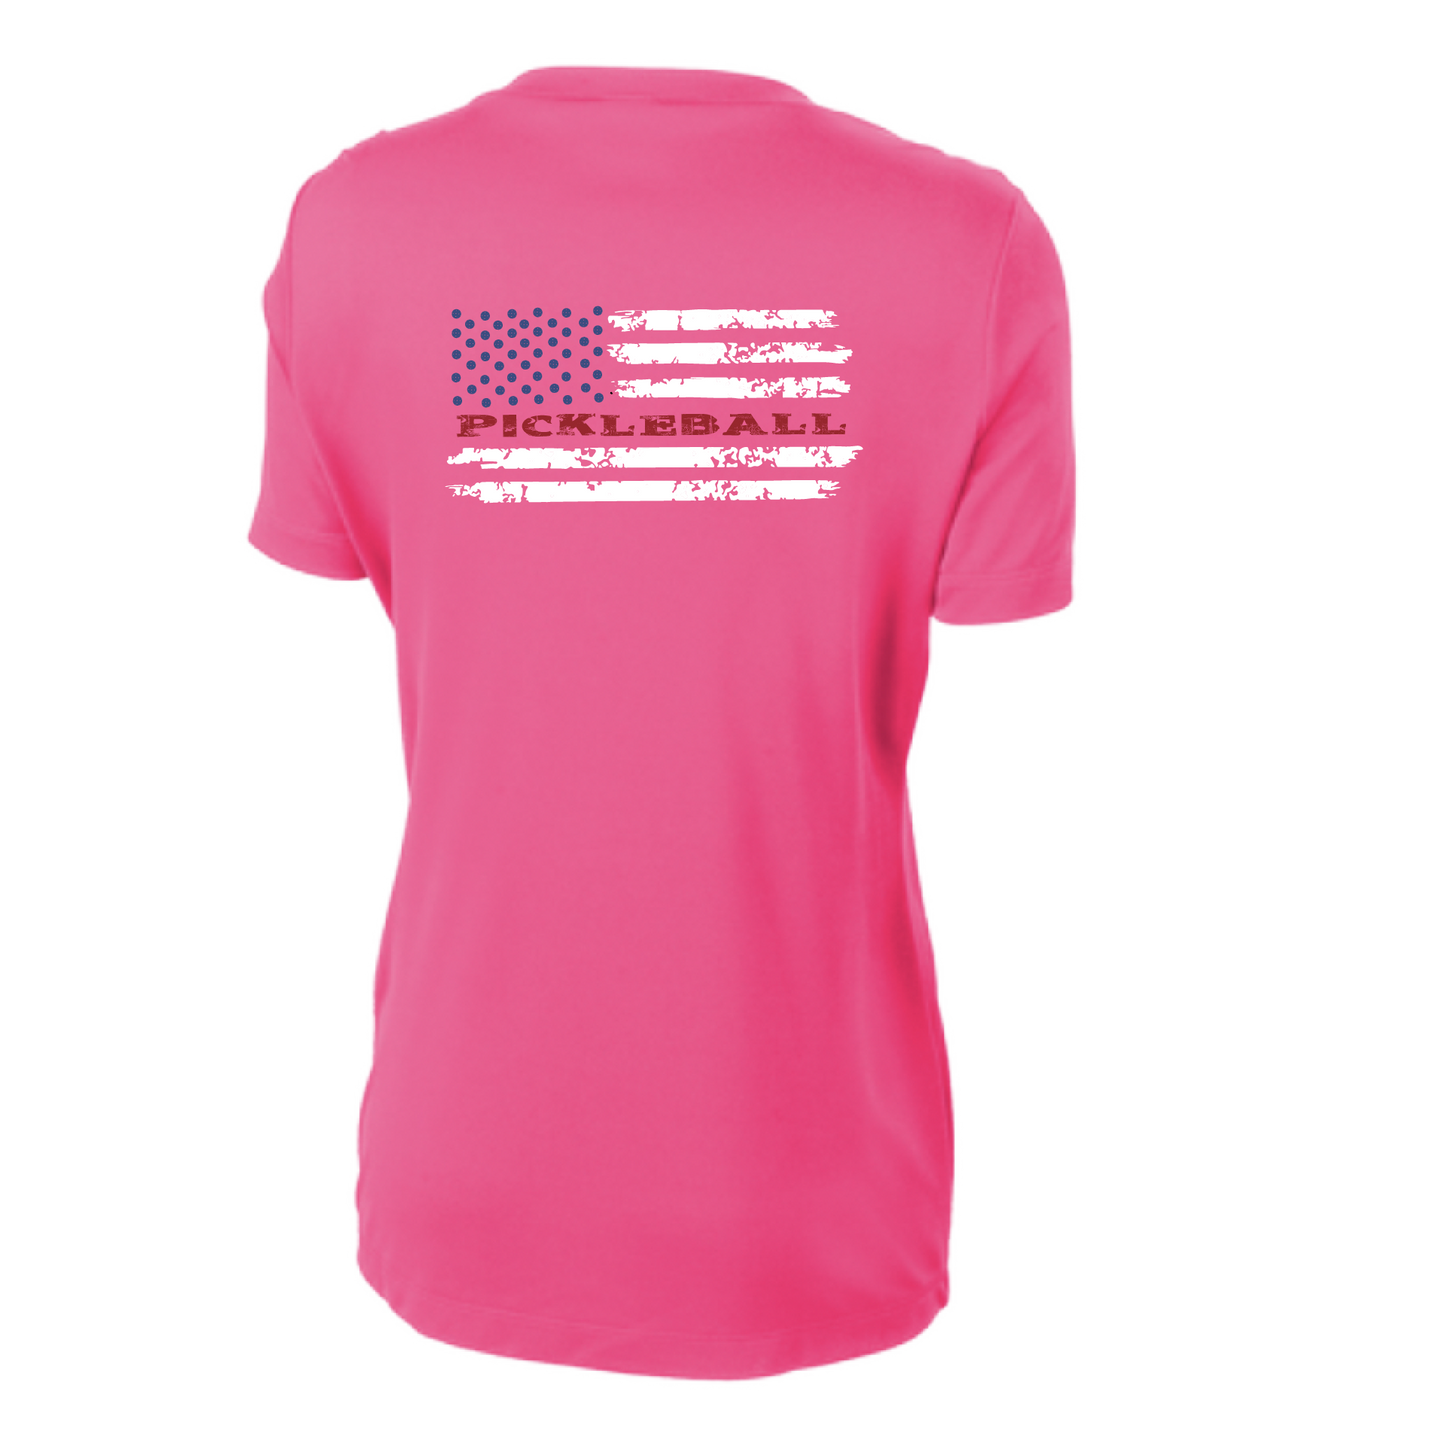 Pickleball Design: Flag Horizontal on Front or Back of Shirt  Women's Style: Short-Sleeve Crew-Neck  Turn up the volume in this Women's shirt with its perfect mix of softness and attitude. Material is ultra-comfortable with moisture wicking properties and tri-blend softness. PosiCharge technology locks in color. Highly breathable and lightweight.